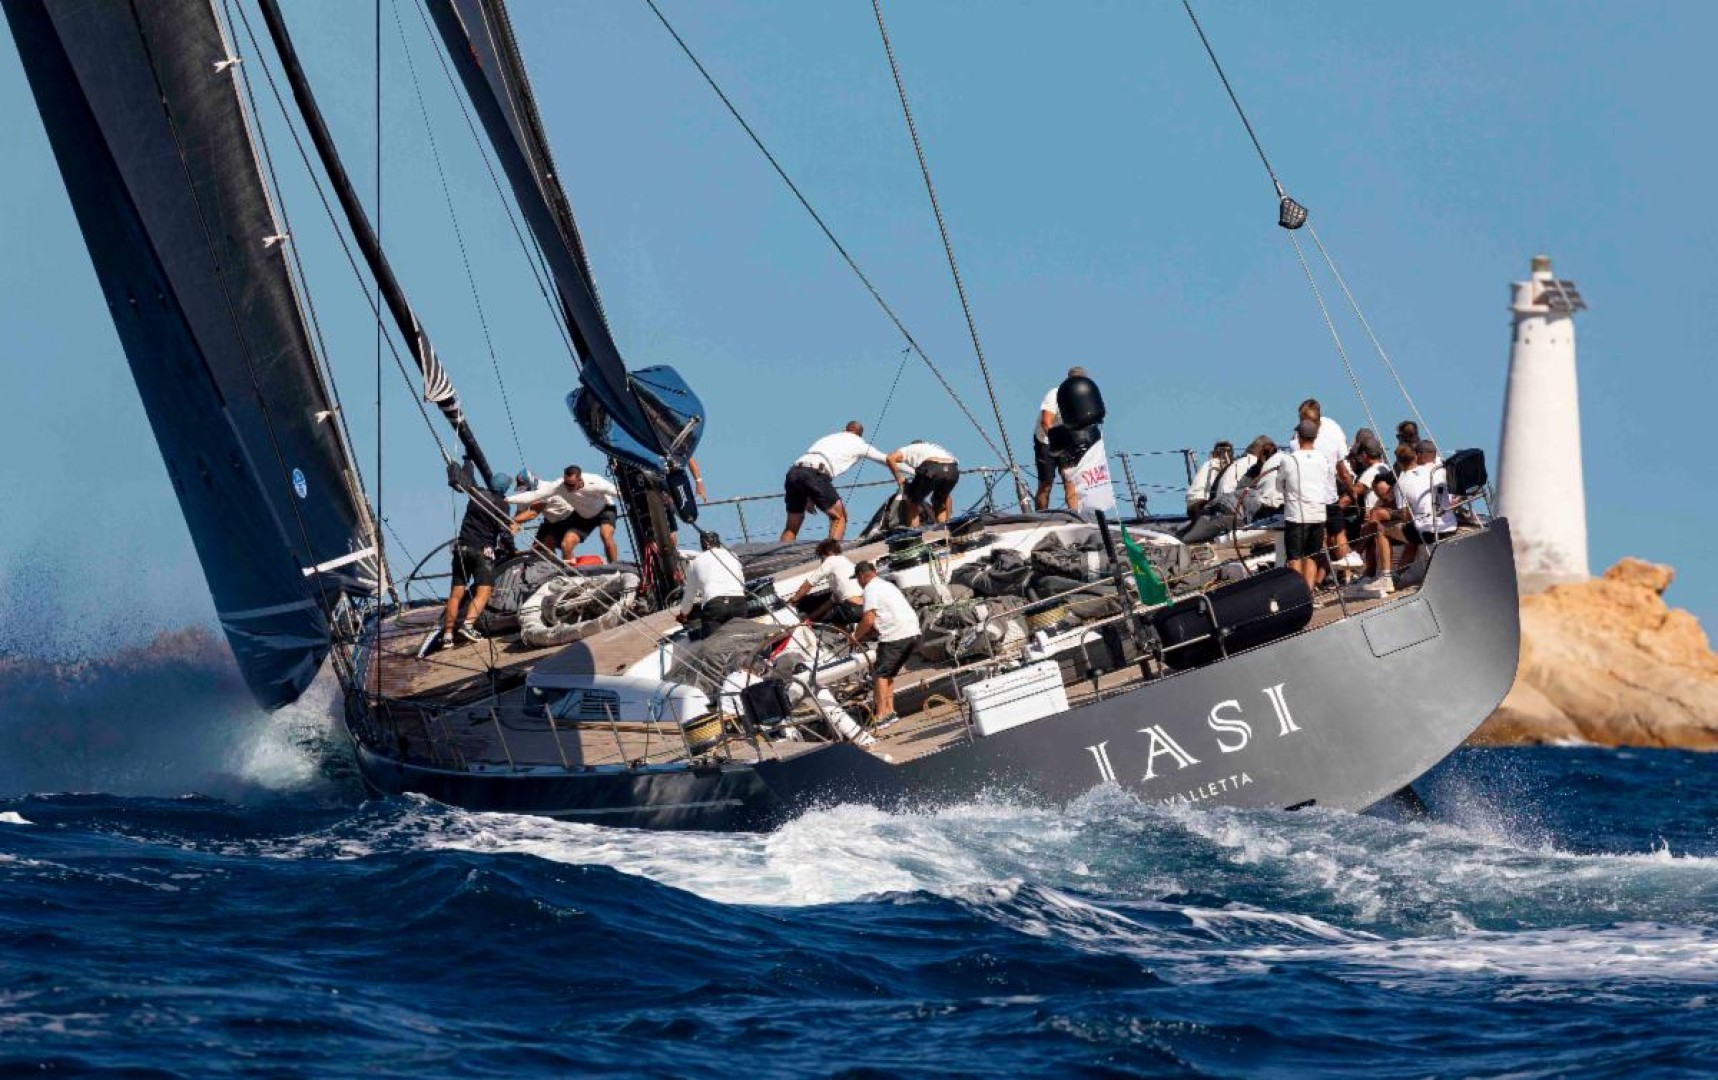 The Magnificent Swan 115 Jasi is one of the favourites for the IMA Transatlantic Trophy for Monohull Line Honours © ClubSwan Racing / Studio Borlenghi